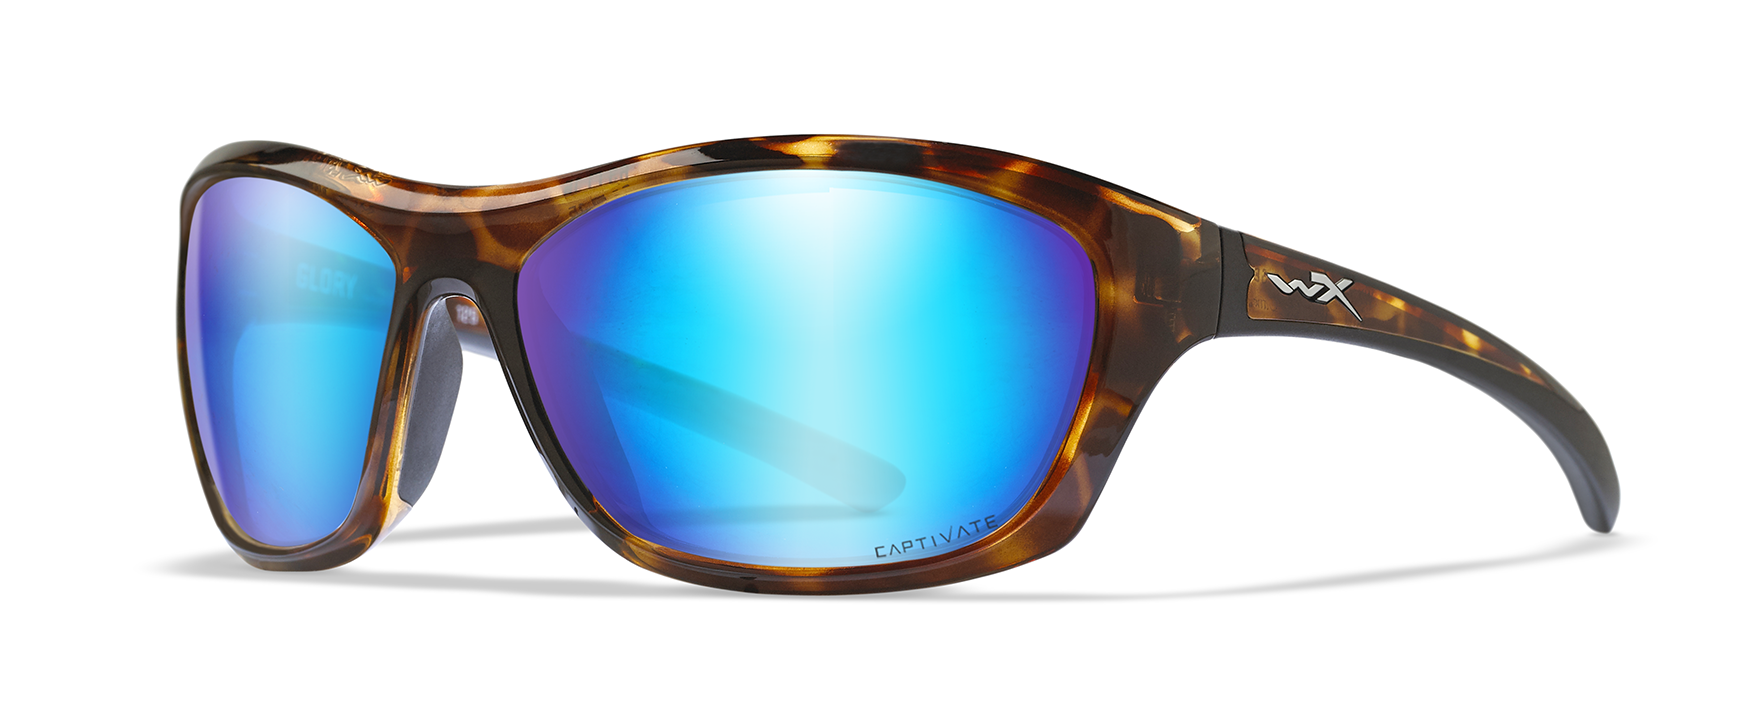 wiley x captivate polarized blue mirror lenses in glory sunglasses